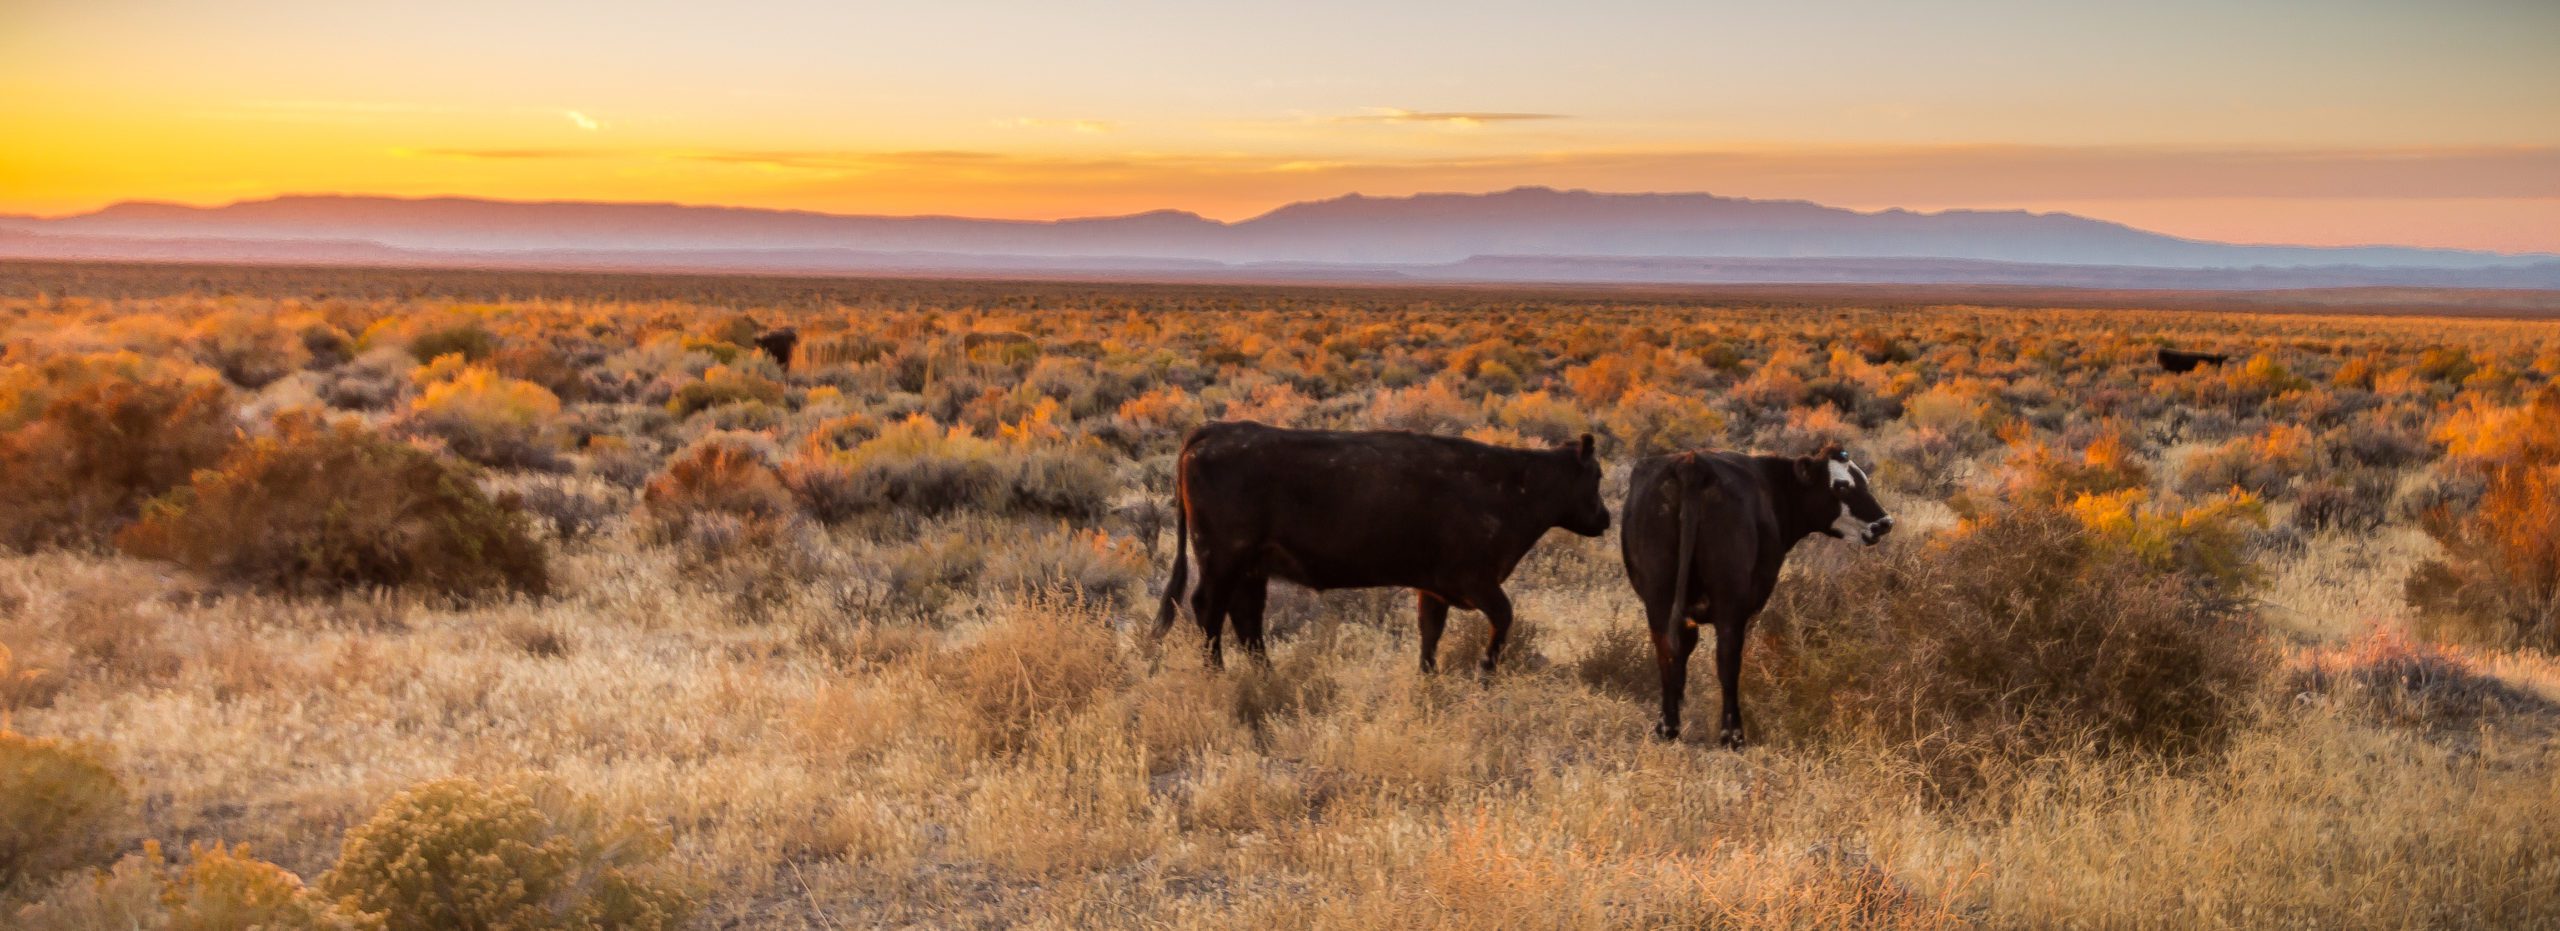 Two black cows in front of sunset